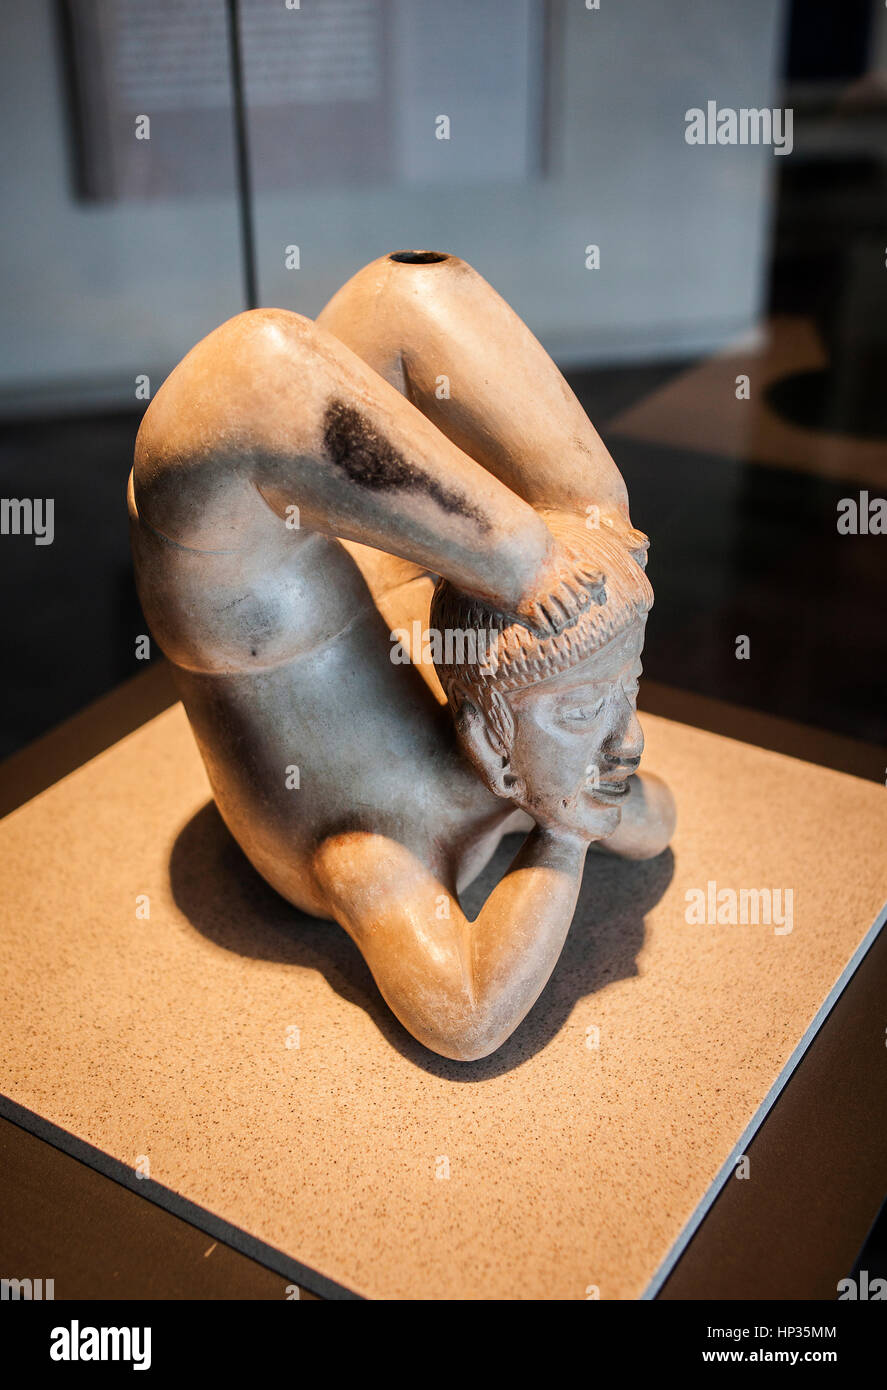 acrobat or contortionist, National Museum of Anthropology. Mexico City. Mexico Stock Photo